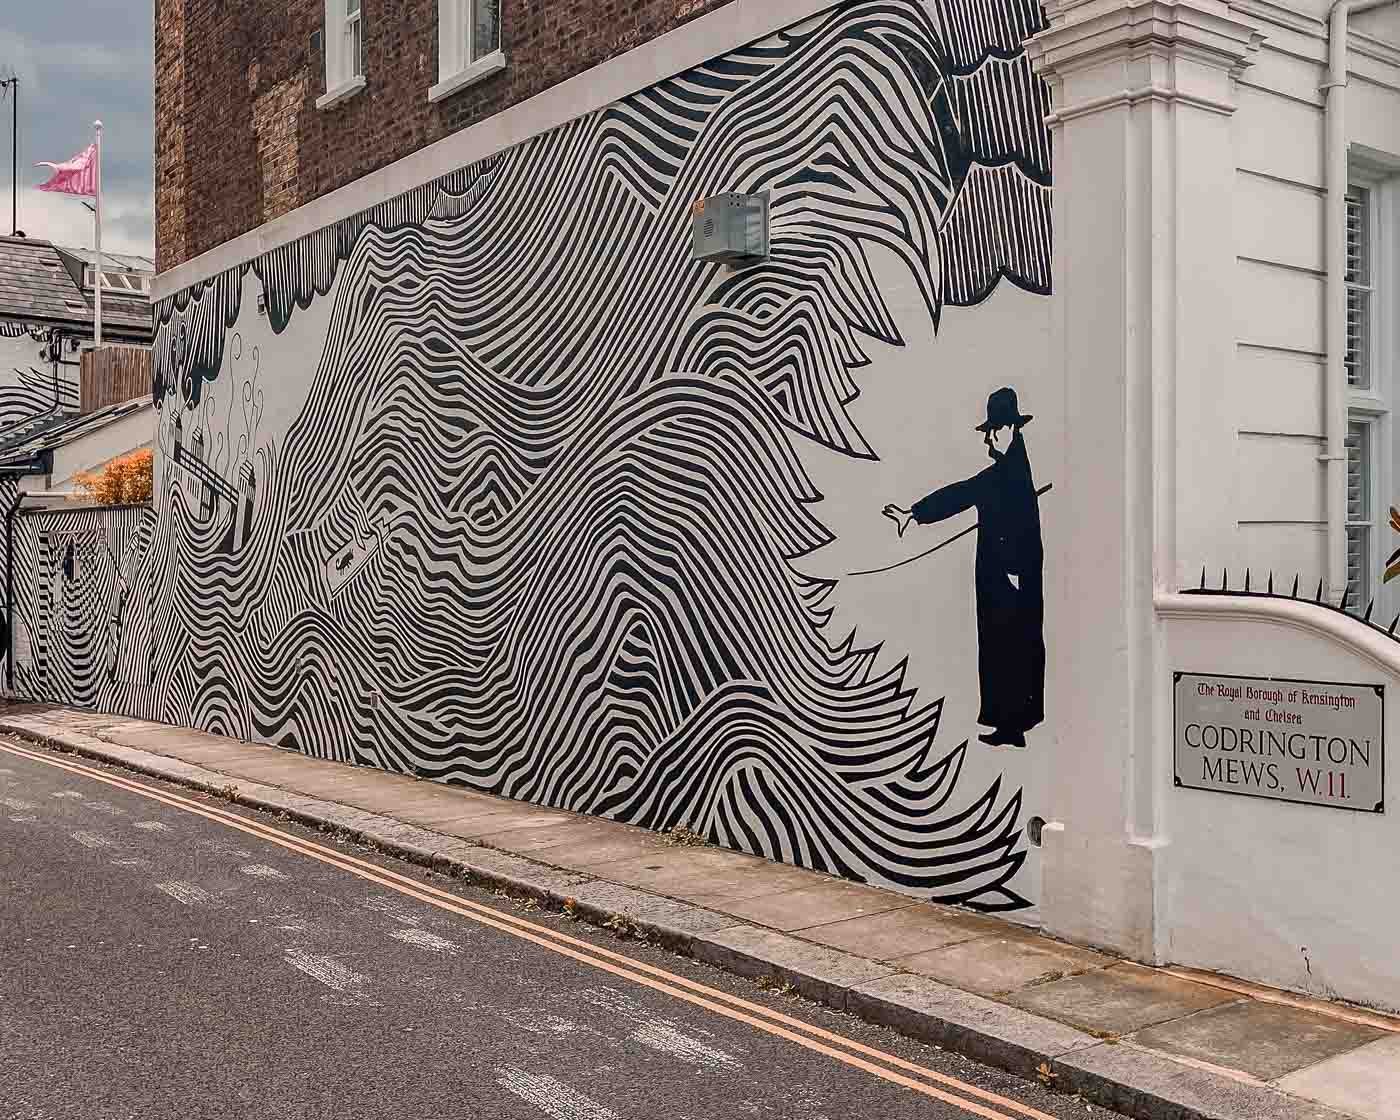 Tucked away close to the Ladbroke Grove Underground station, between the bookshop from the movie Notting Hill and Rough Trade West, you'll discover a hidden gem: a mural of the album art from Yorke's 2006 solo album, "The Eraser." If you're a fan of Thom Yorke's solo work or Radiohead's iconic sound, a trip to West London should be on your travel list.